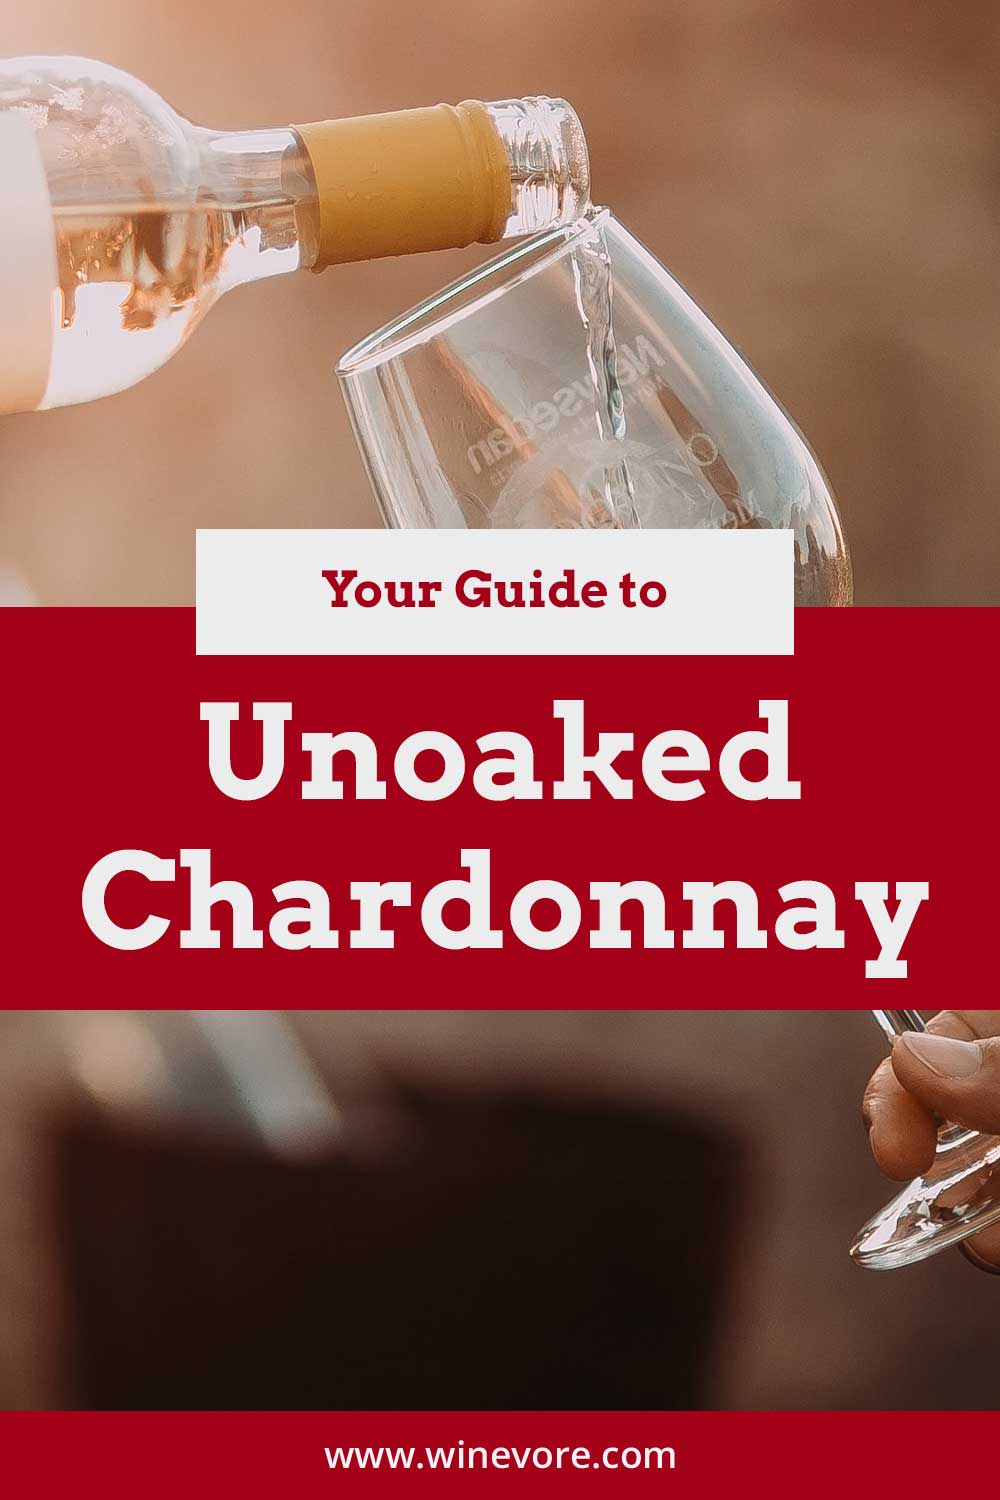 Pouring wine into a glass - Your Guide to Unoaked Chardonnay.